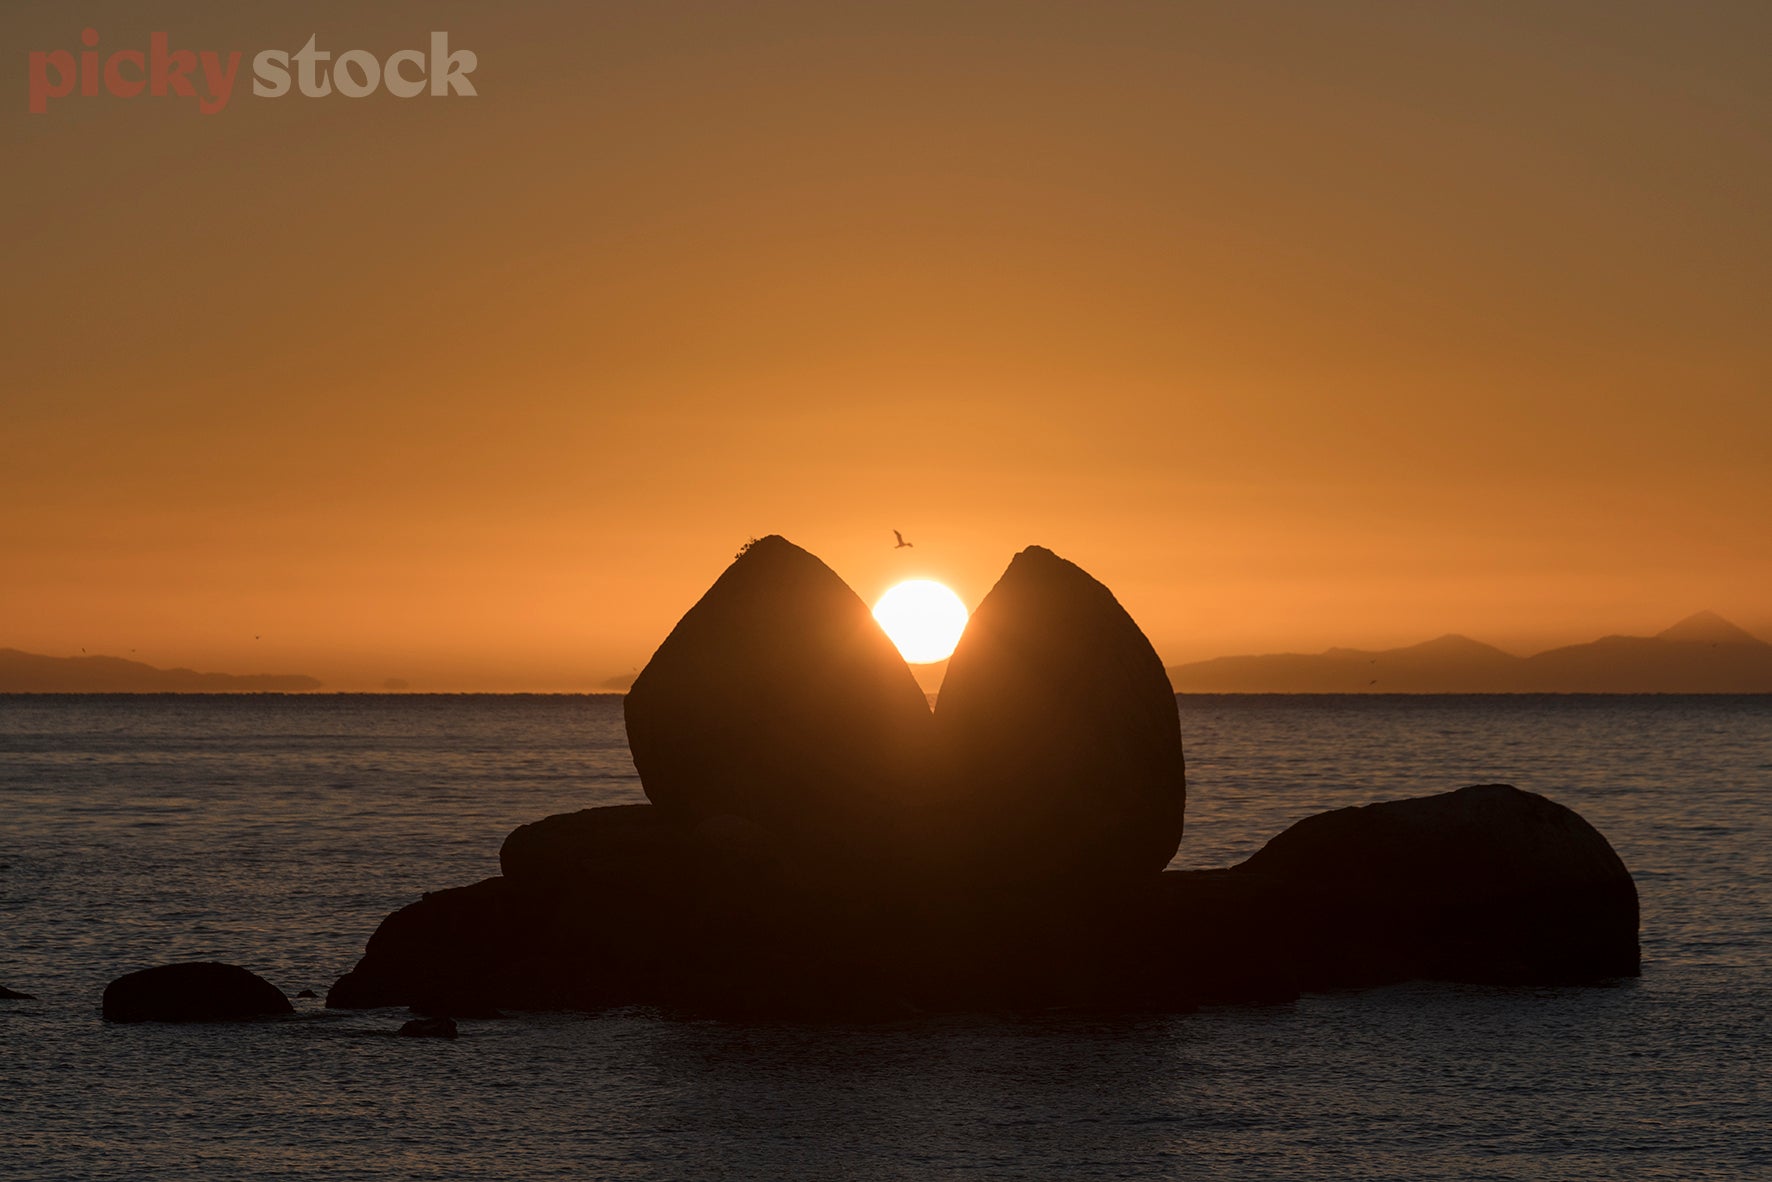 Sunrise at Split Apple Rock. Light perfectly connecting with split of the rock with light leaking through. Rock sitting in the middle of the ocean. Water is calm, early morning light. 